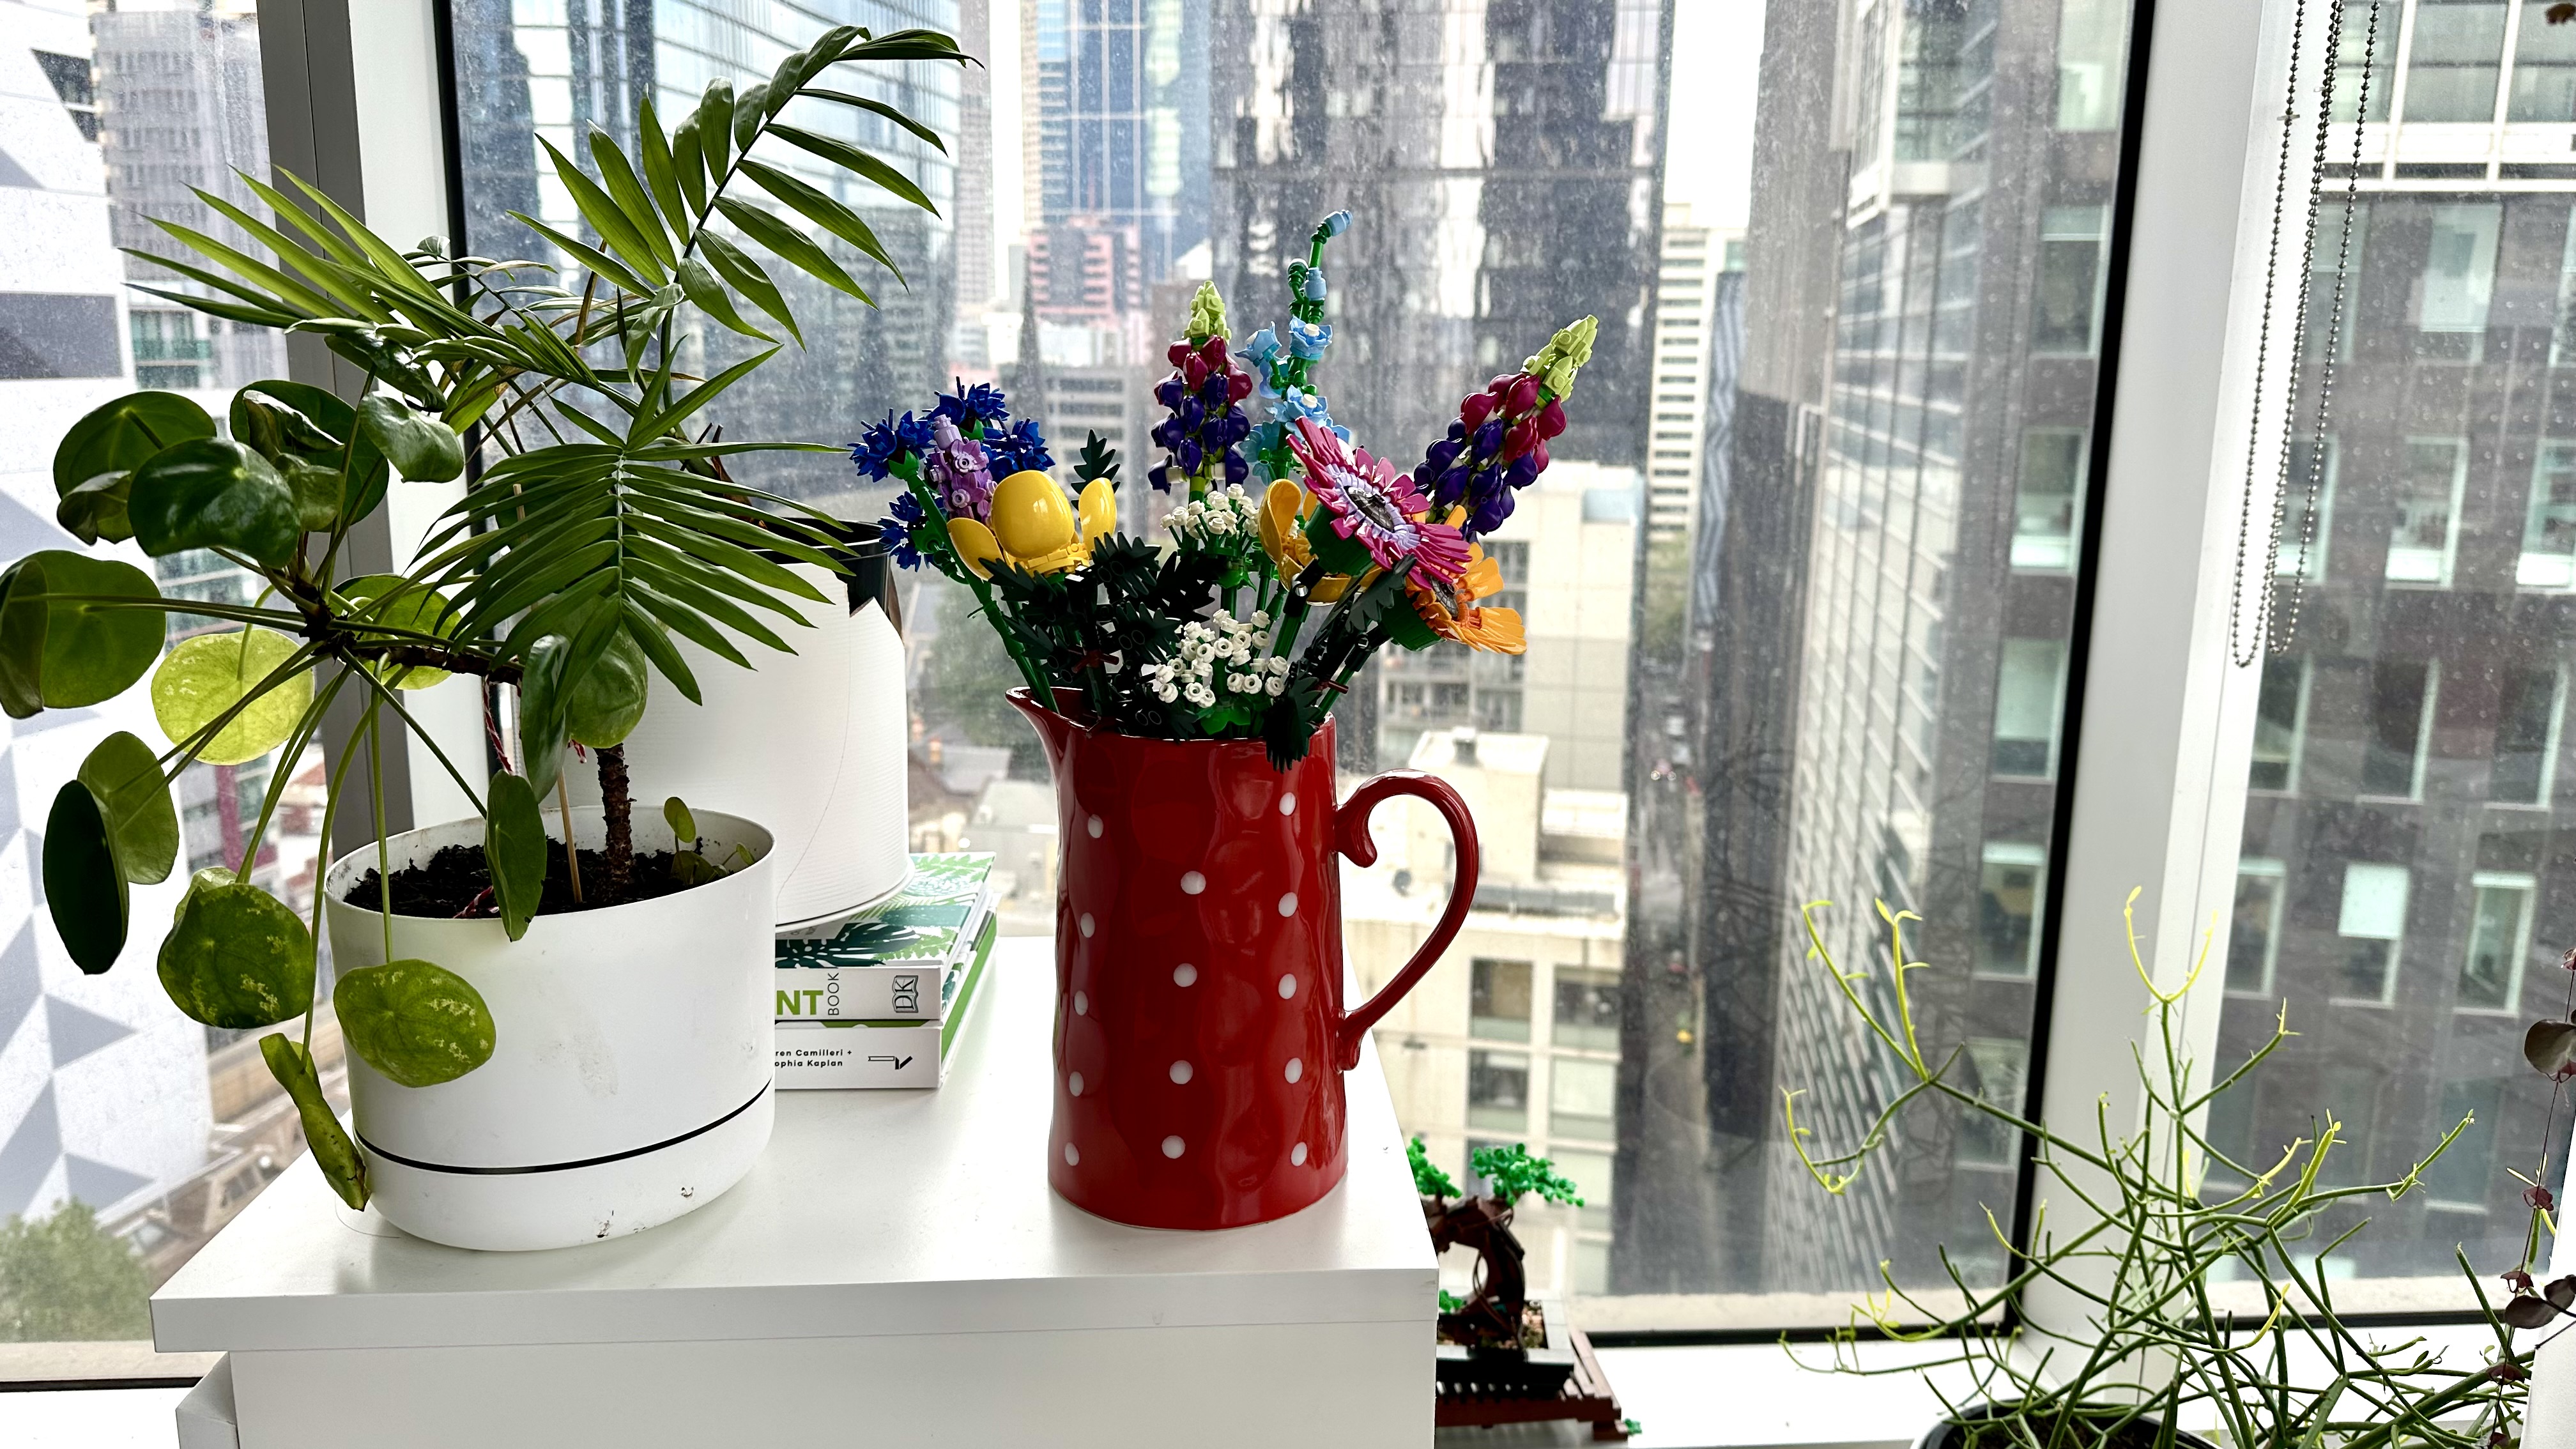  Lego Wildflowers set in a vase on s table